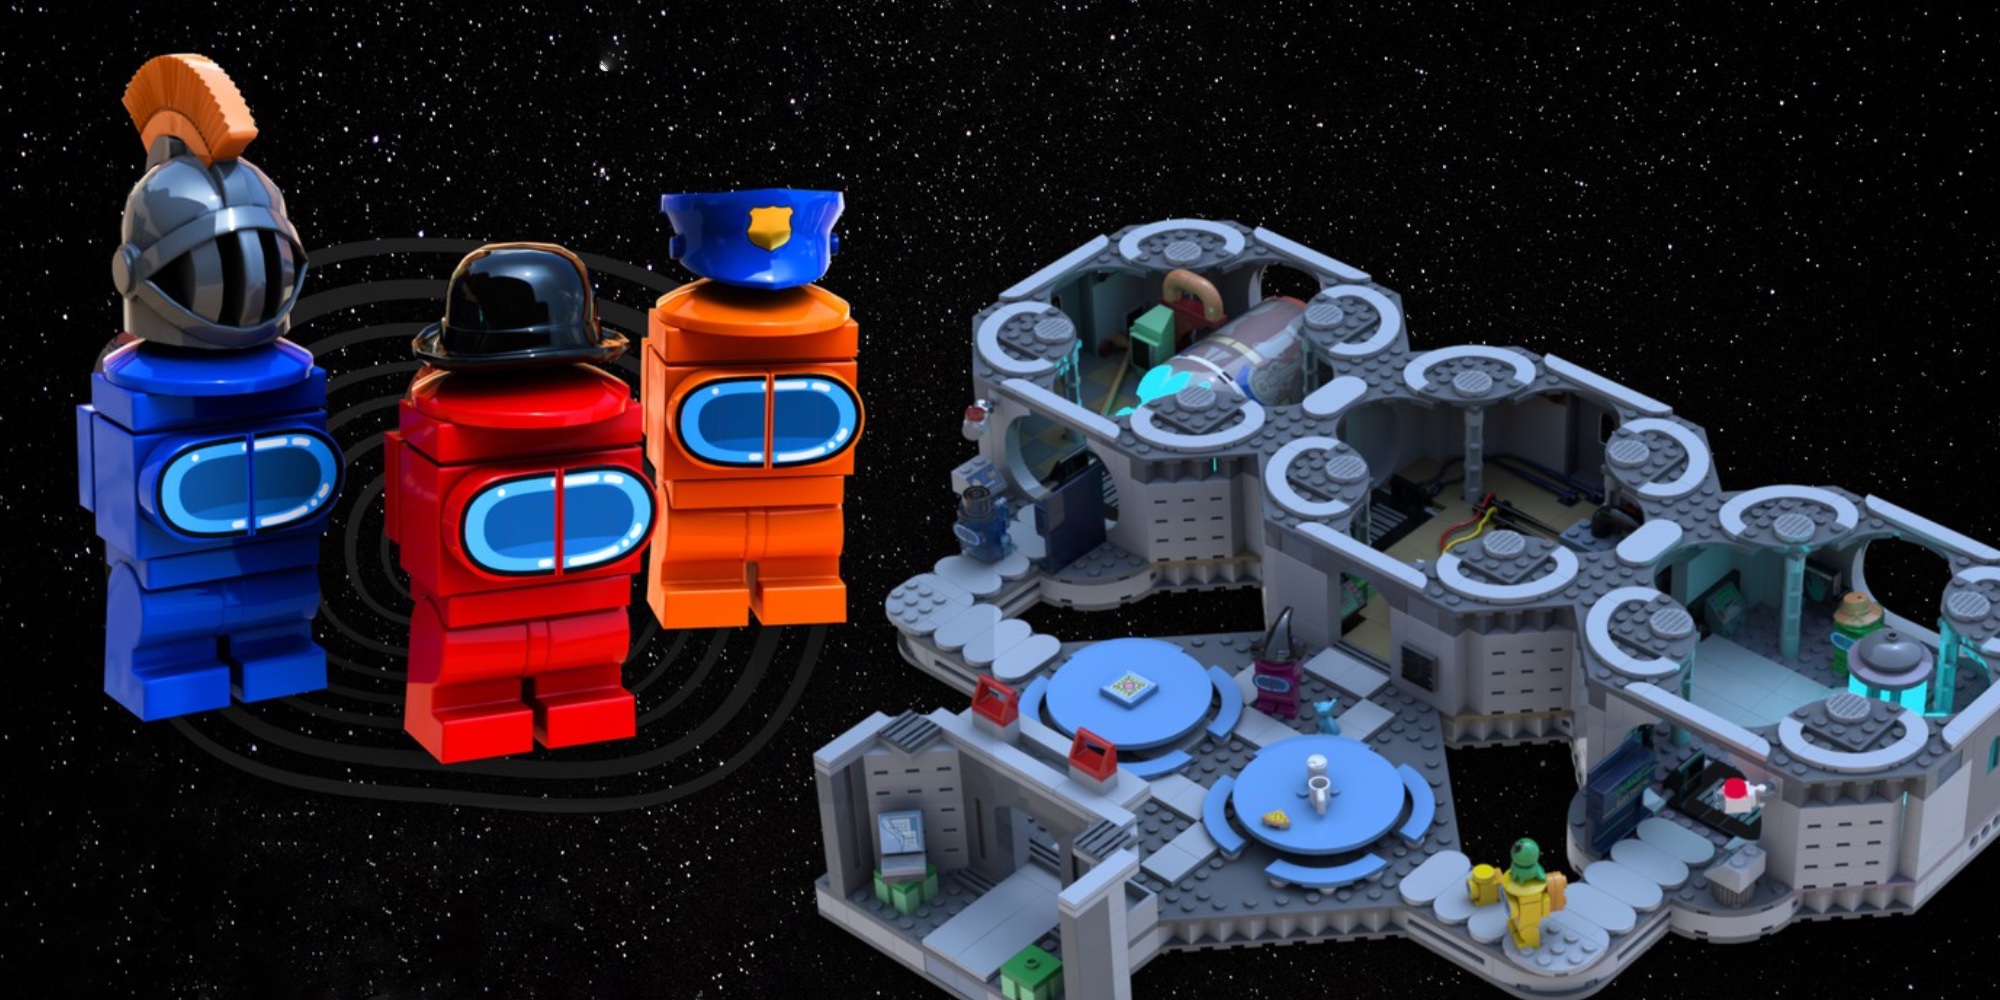 Fremsyn koks Turbulens LEGO Among Us highlights October's best Ideas projects - 9to5Toys